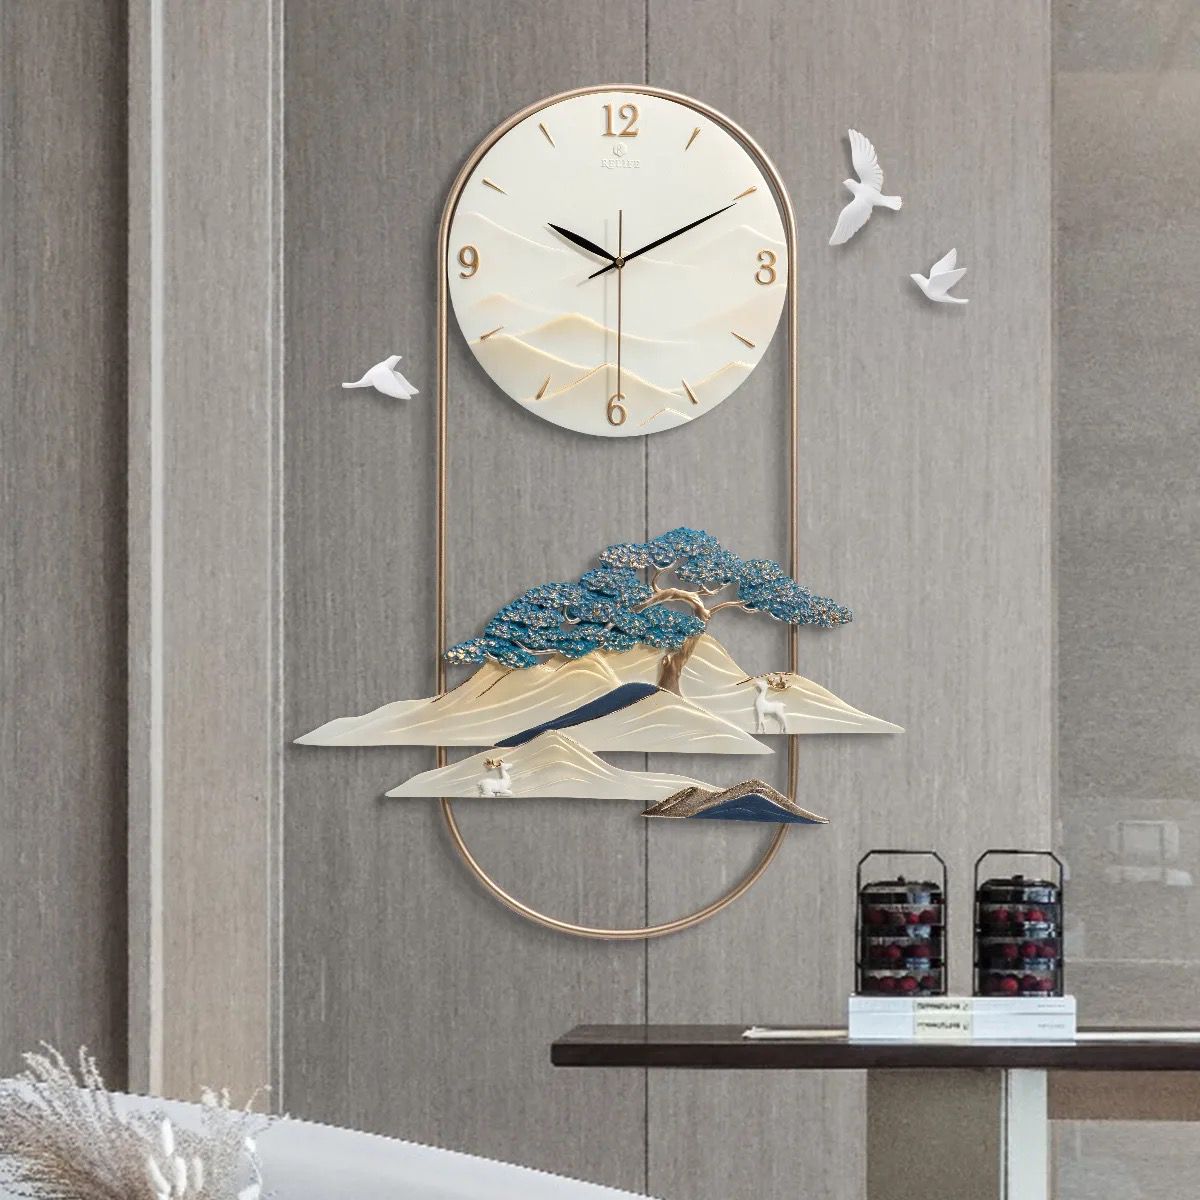 Premium Resin Wall Clock With Metal Frame & Side Birds